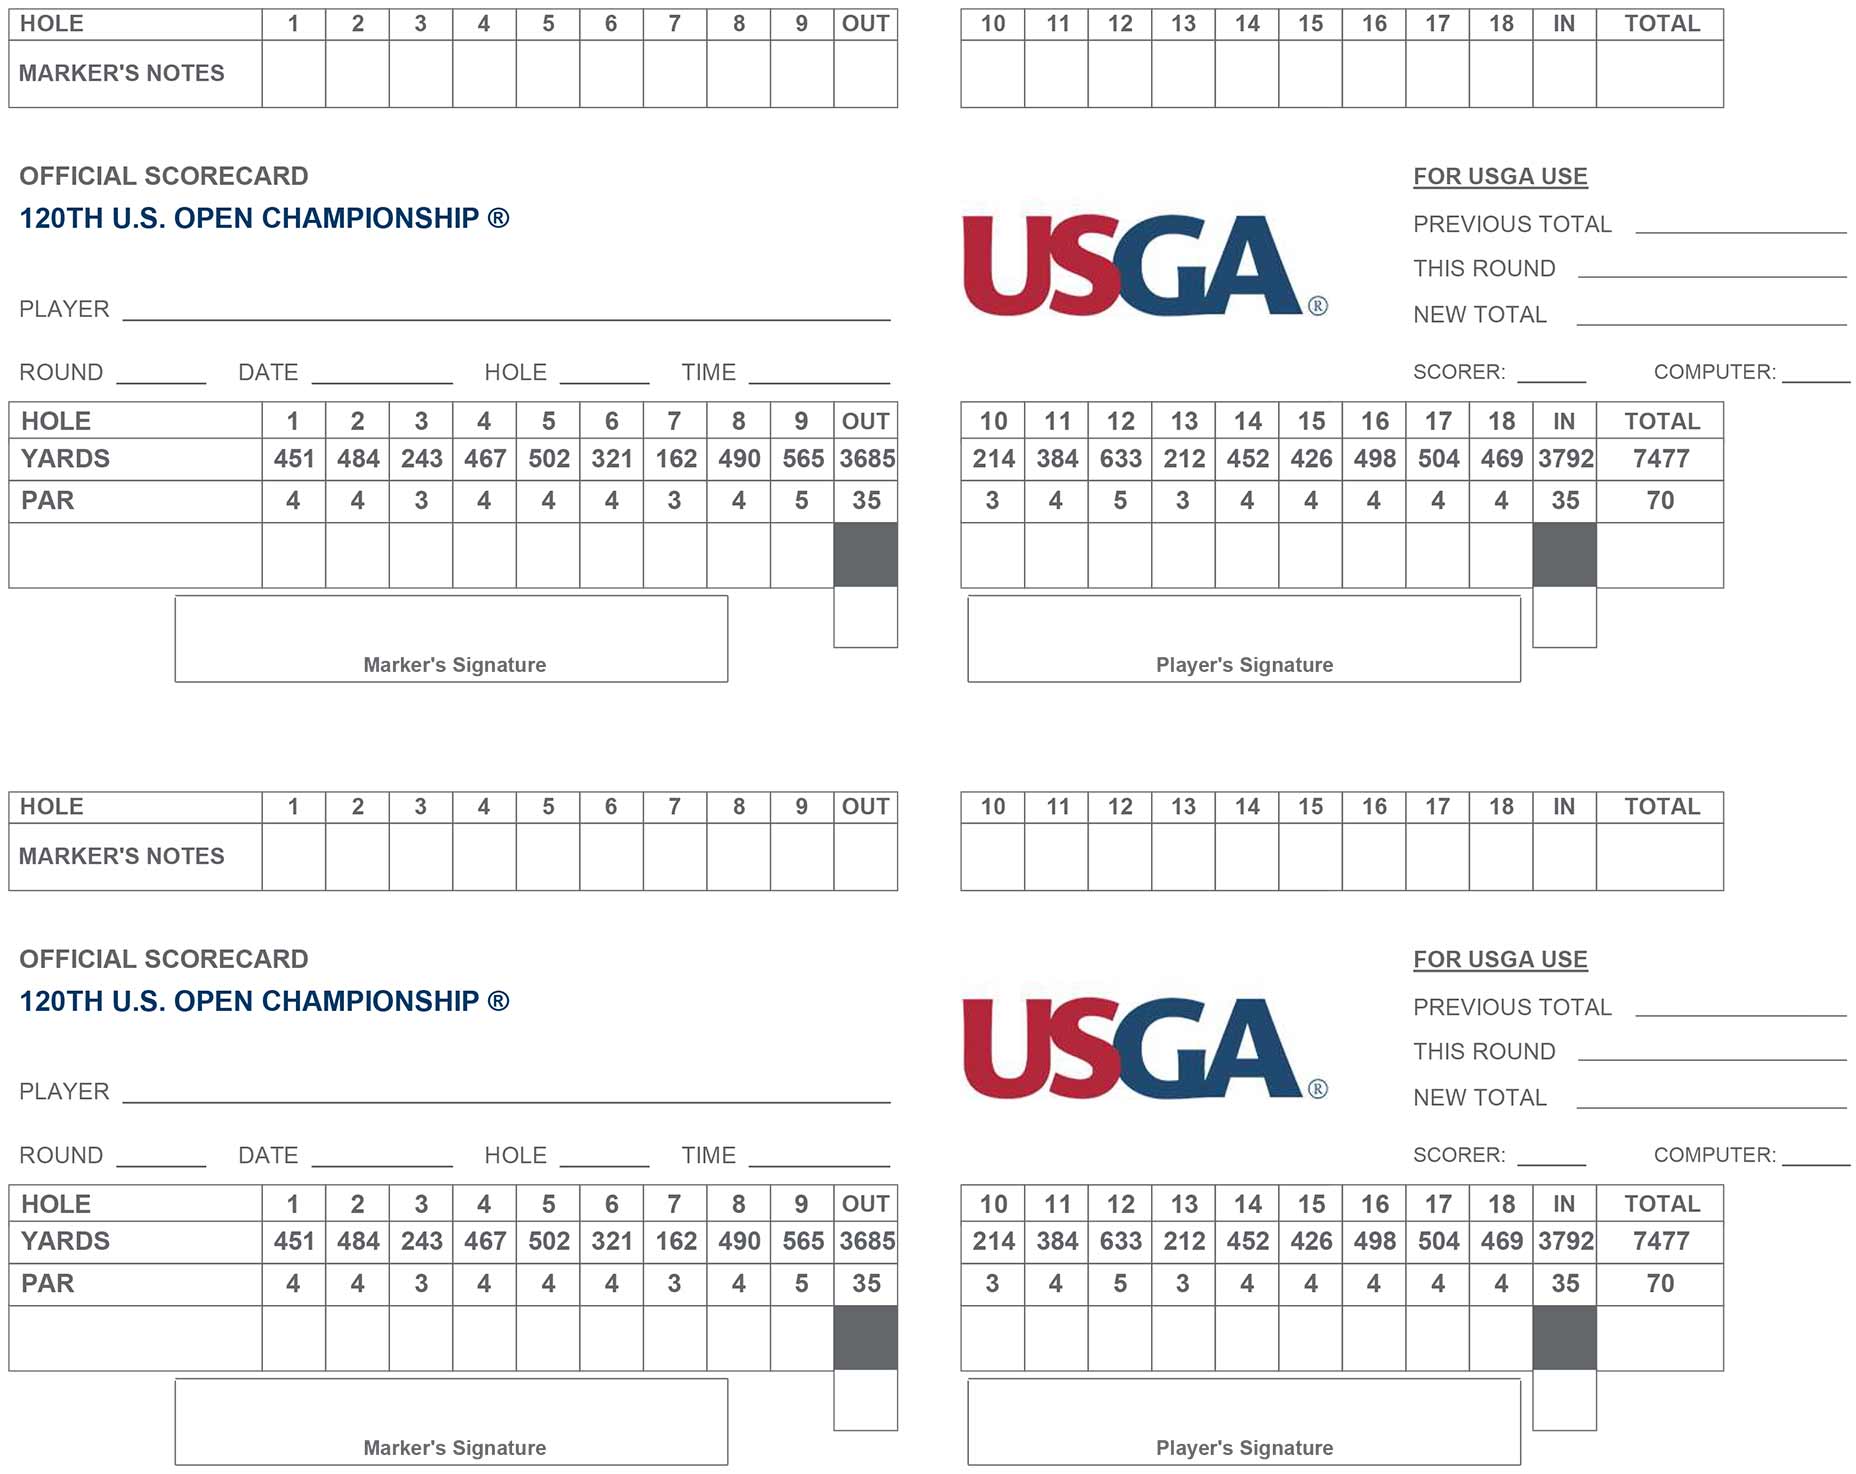 Winged Foot scorecard How the U.S. Open will play differently for pros